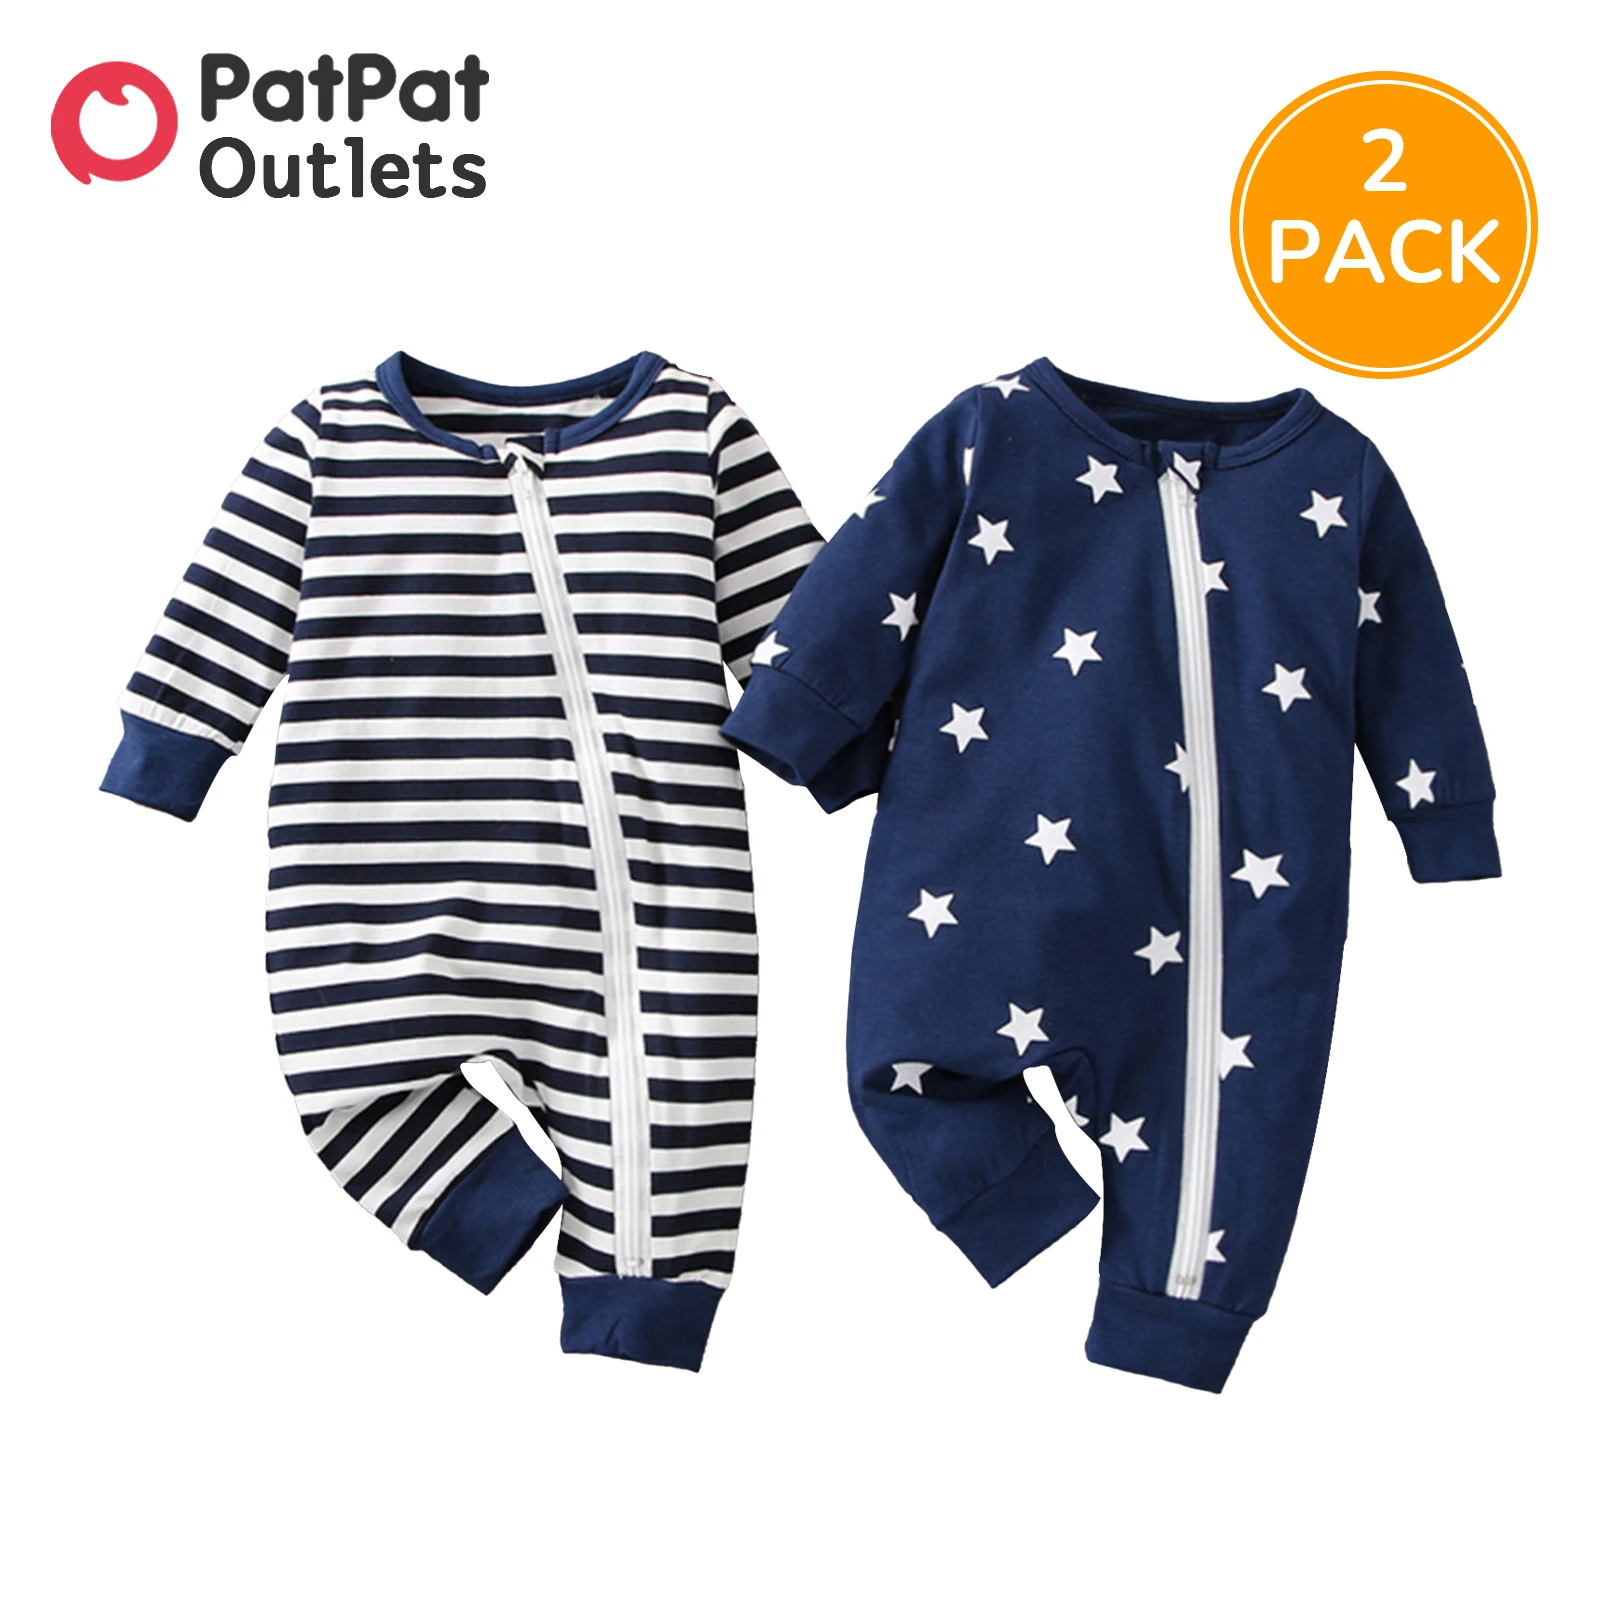 

PatPat 2-Pack Overalls Baby Boy Clothes New Born Romper Infant Newborn Stars Print Long-sleeve Striped 95% Cotton Jumpsuit Sets